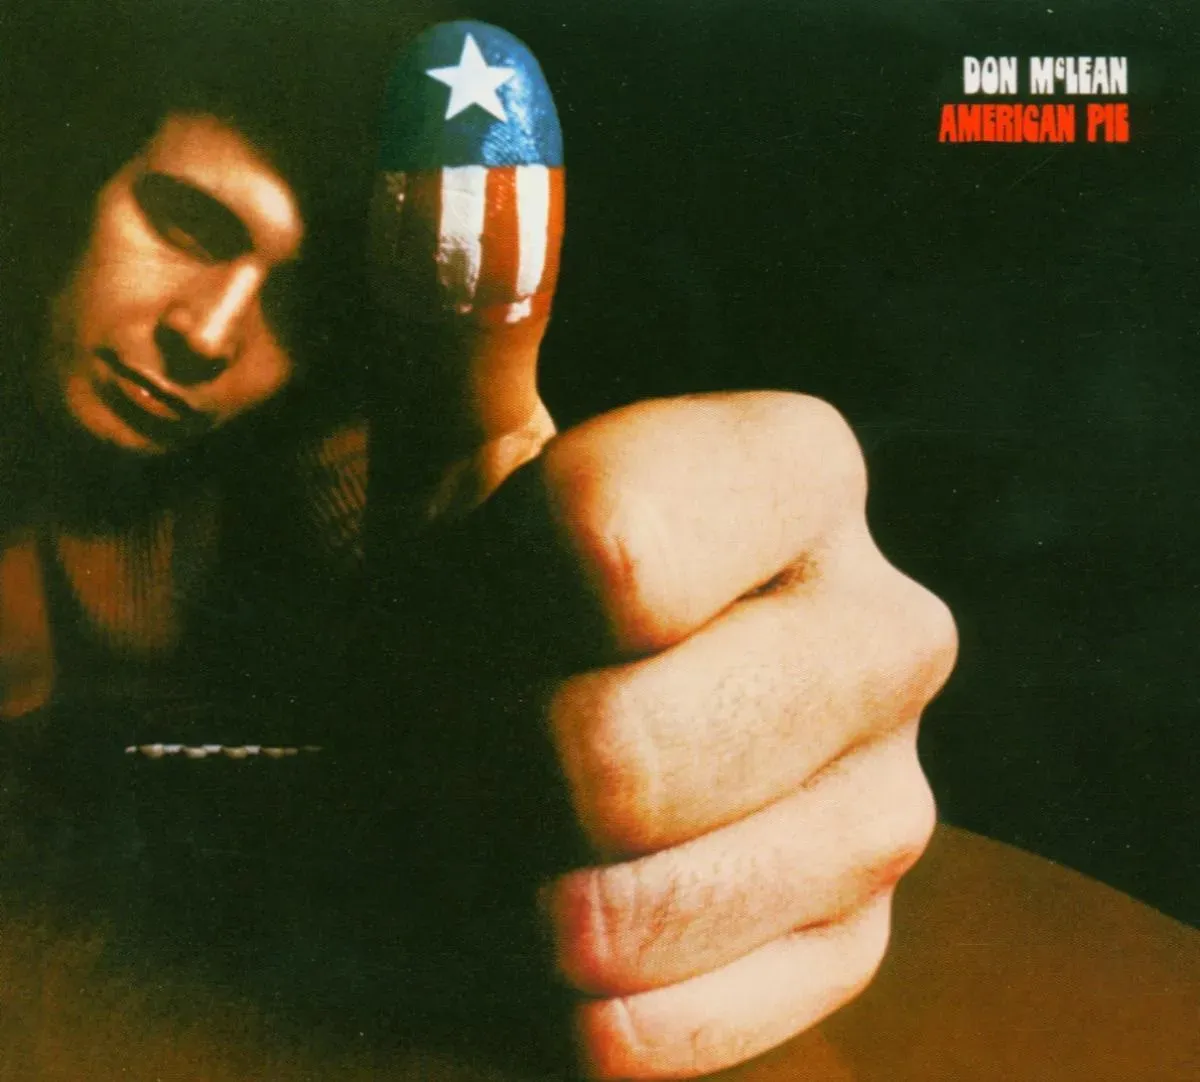 American Pie (Remastered) - Don McLean. (CD)